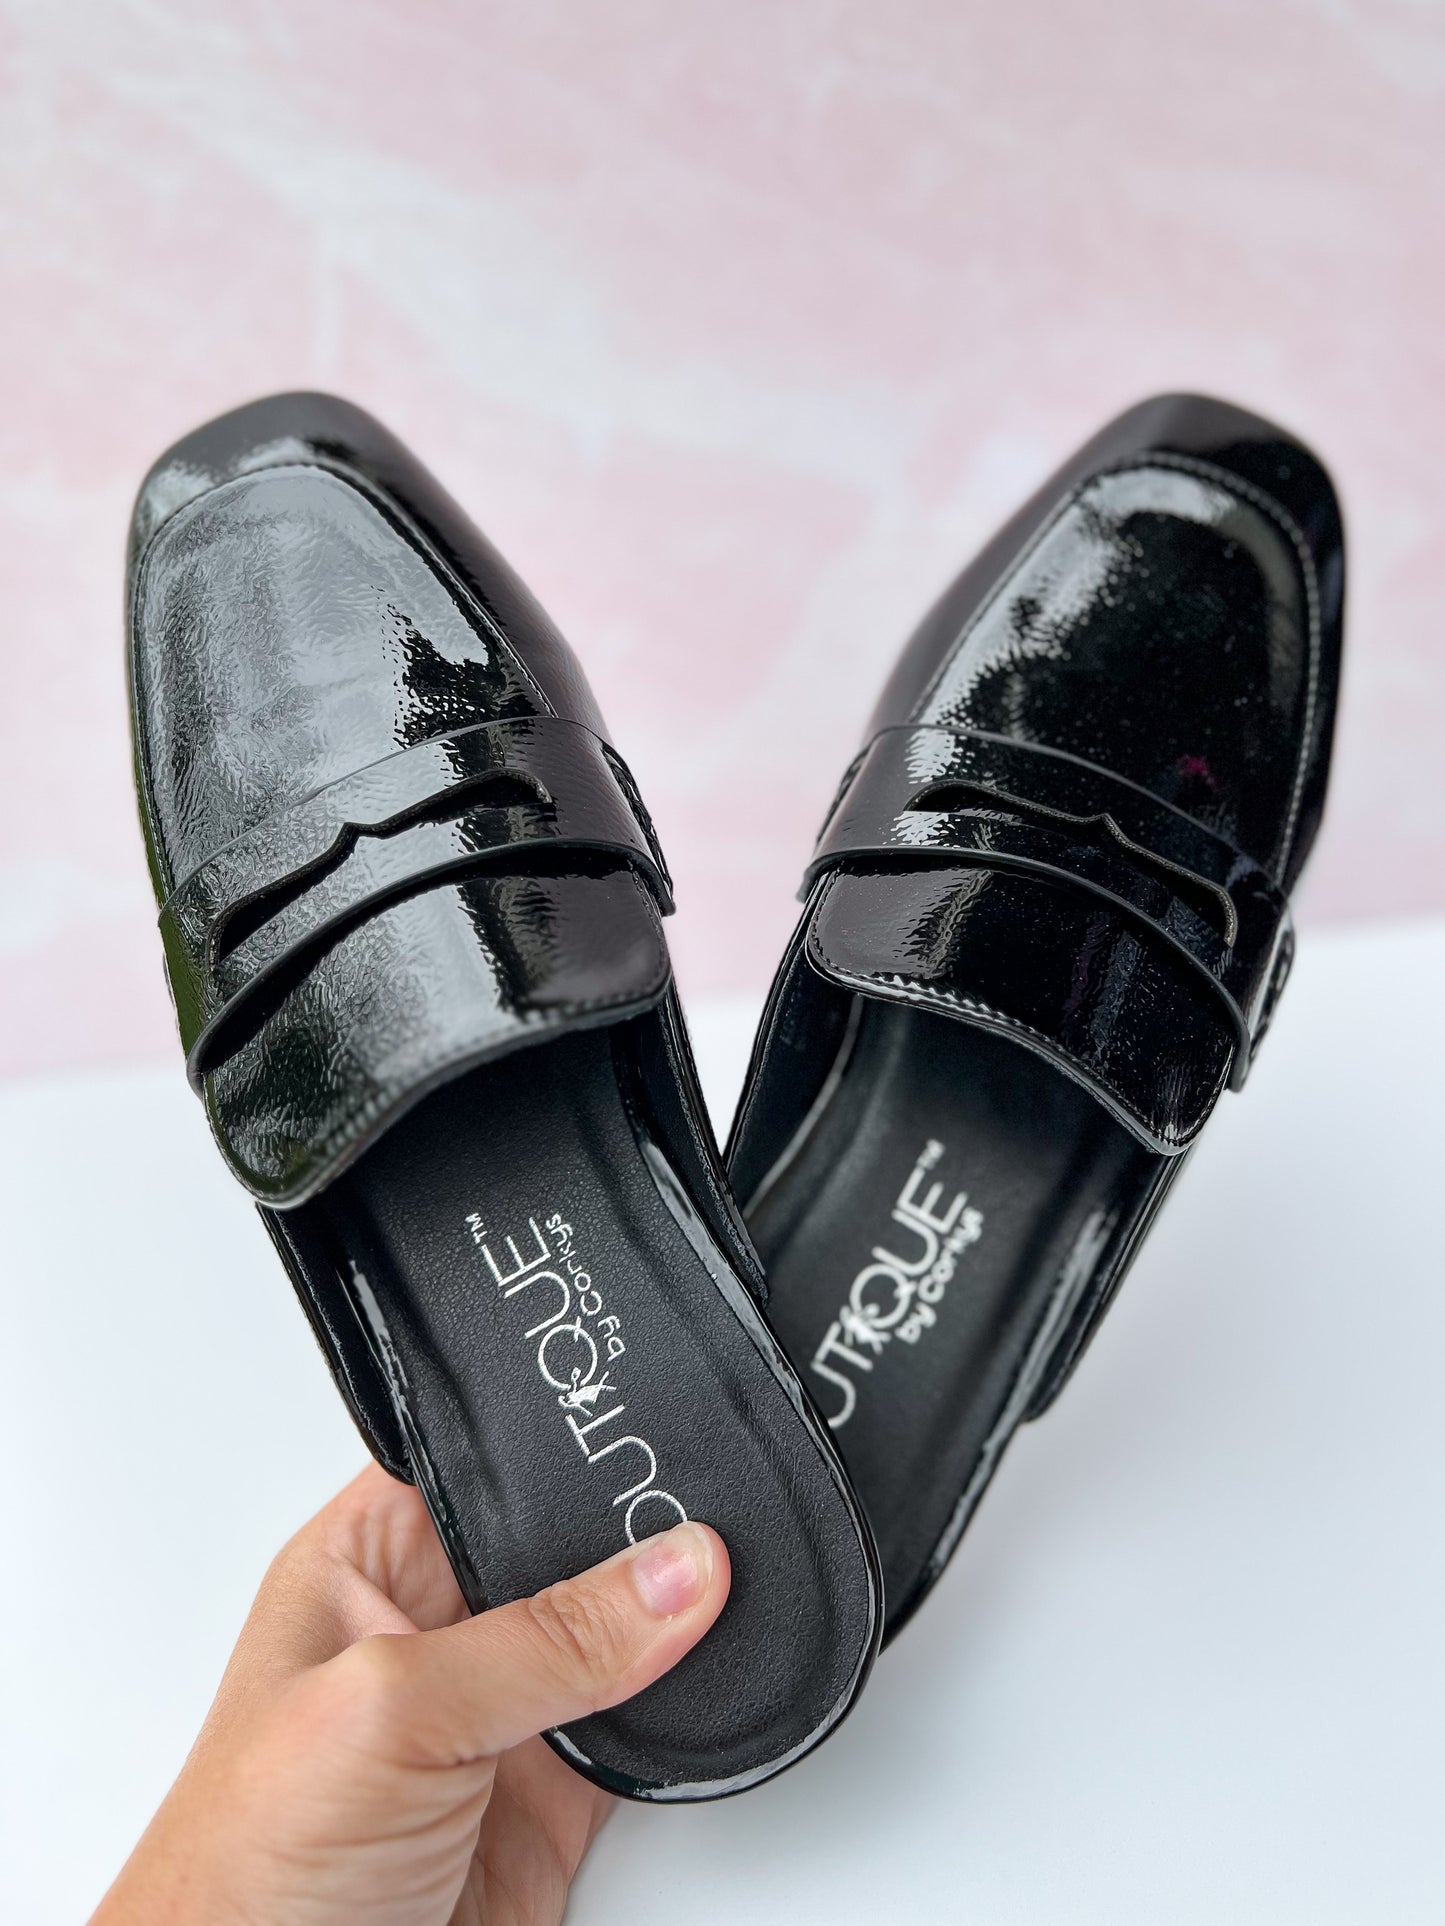 Corky's It's Fall Yall Loafer - Black Patent